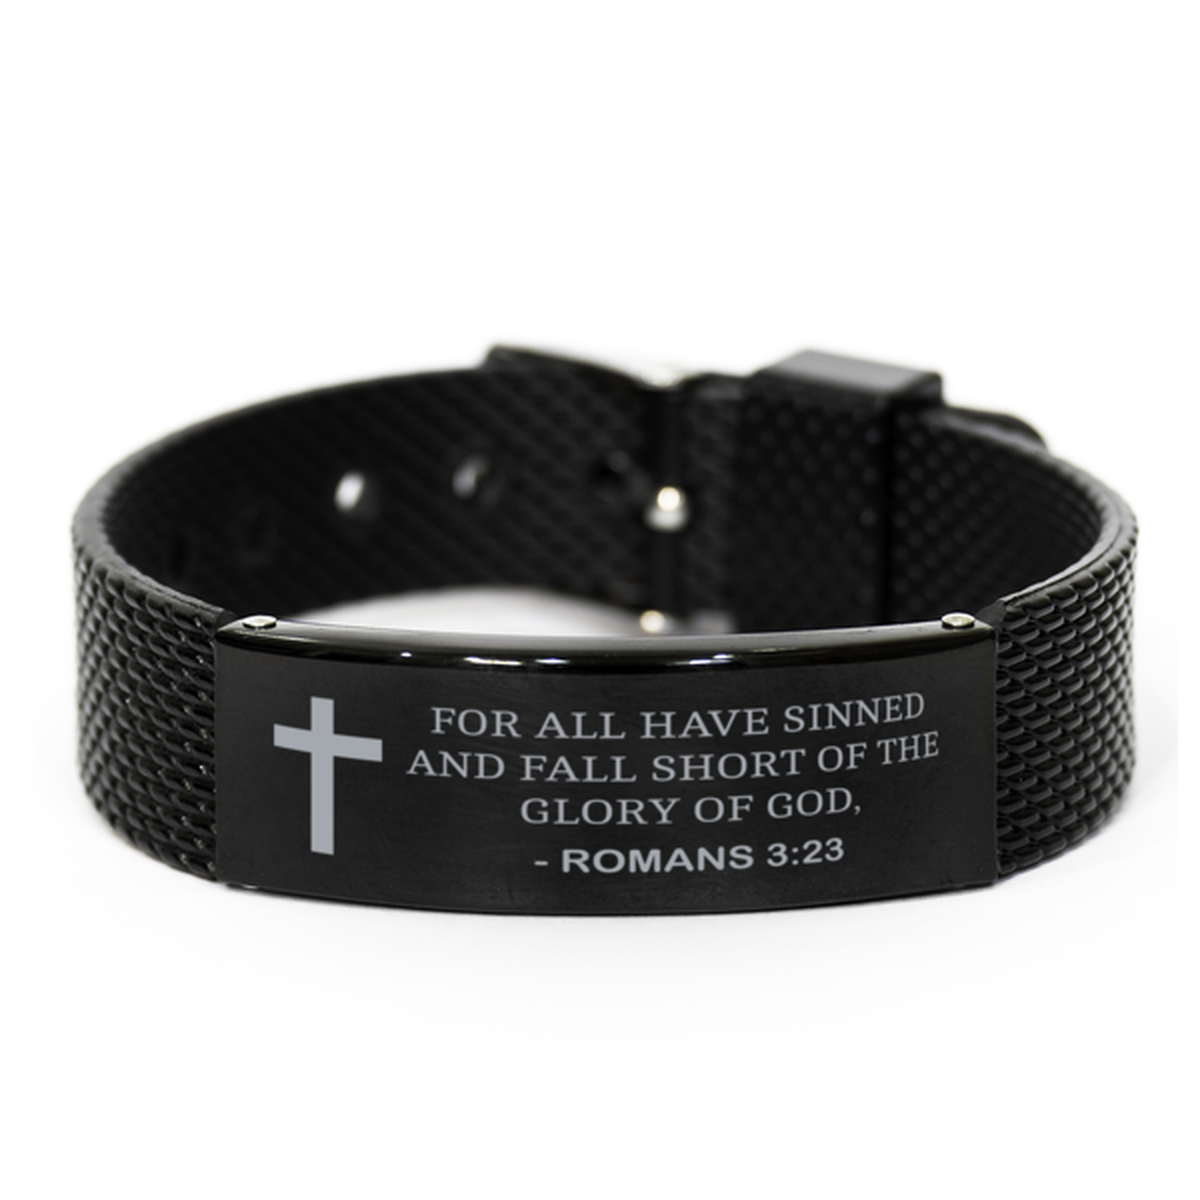 Christian Black Bracelet,, Romans 3:23 For All Have Sinned And Fall Short Of The Glory, Motivational Bible Verse Gifts For Men Women